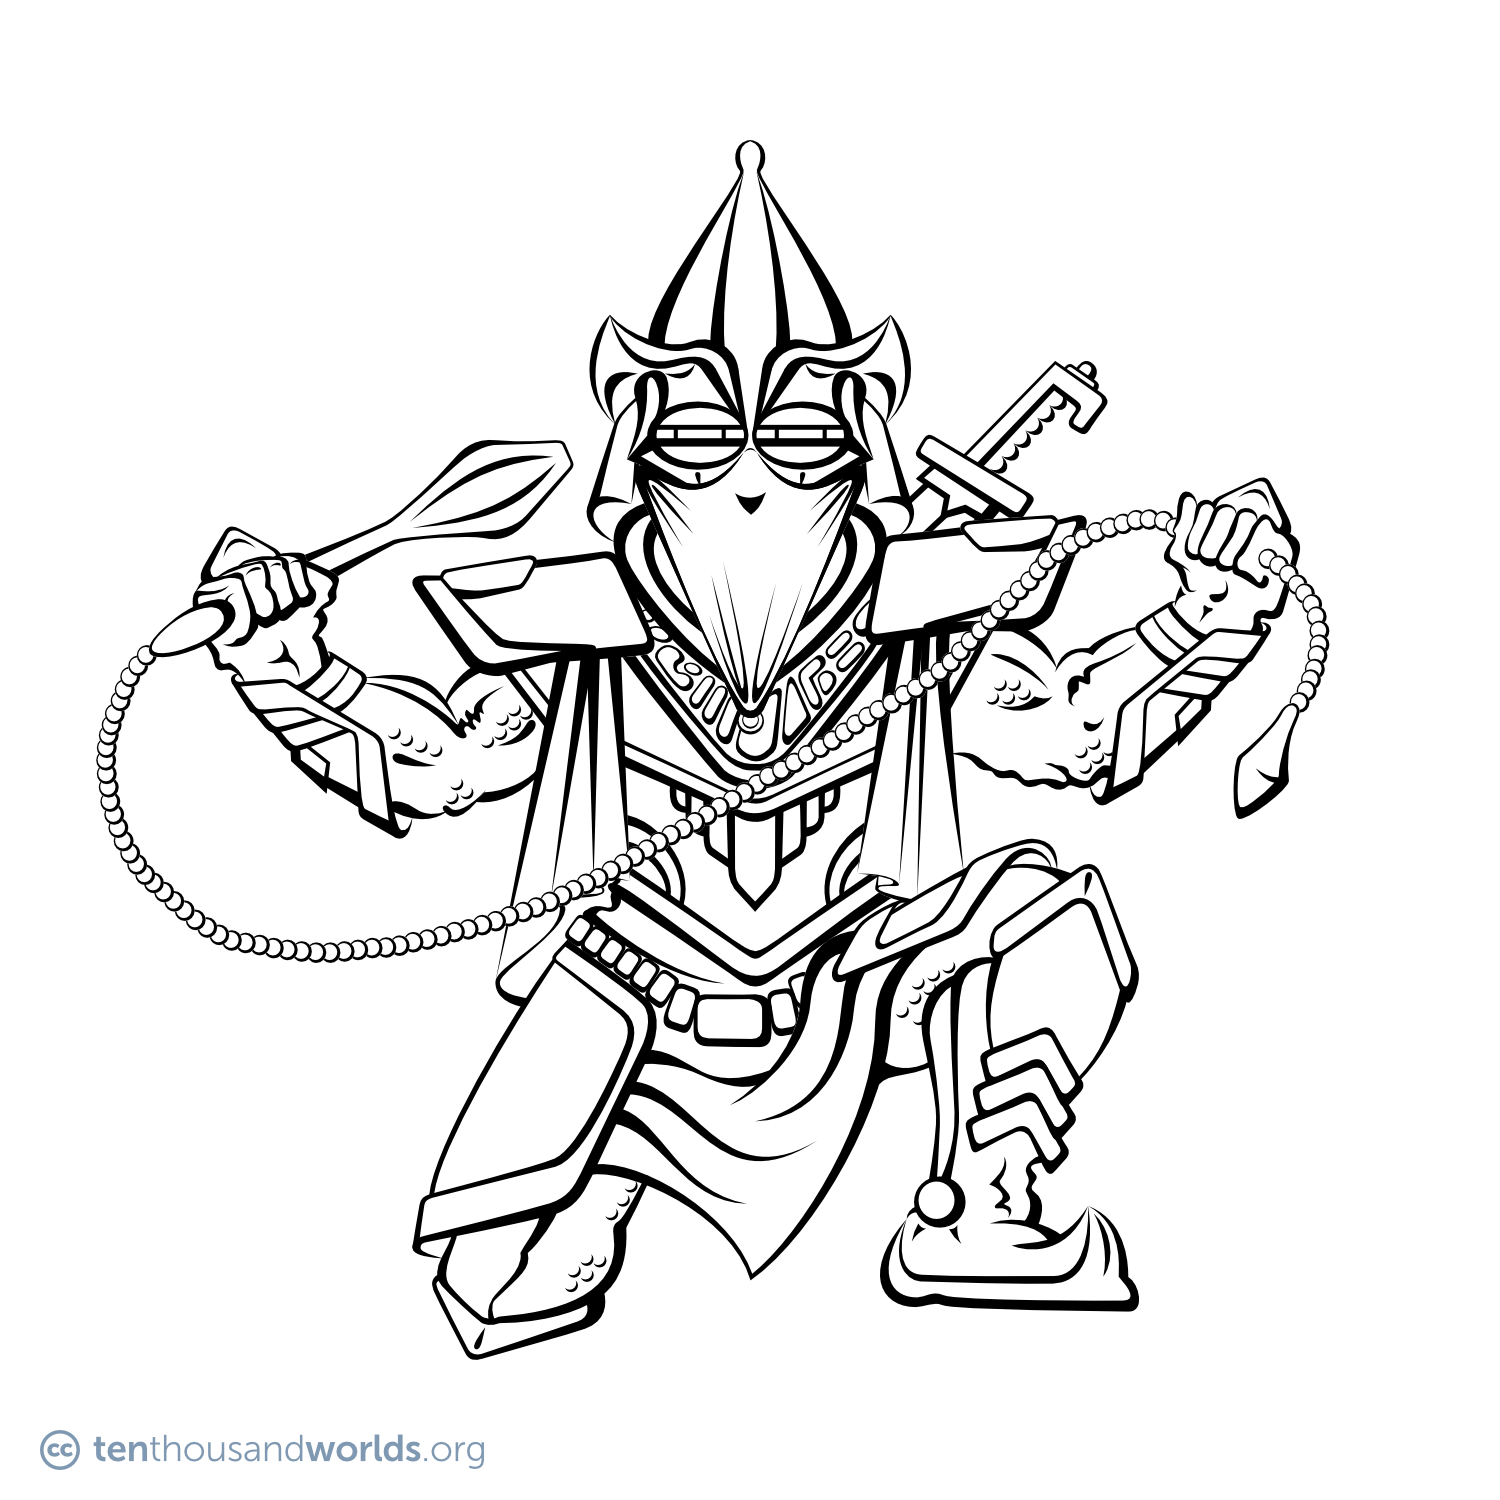 An ink outline of a stocky warrior in full armor, a conical helmet, and a pectoral full of semi-precious stones; down on one knee; holding a weapon in both hands that consists of a chain with a club on one end and a weight on the other; preparing to make it spin.